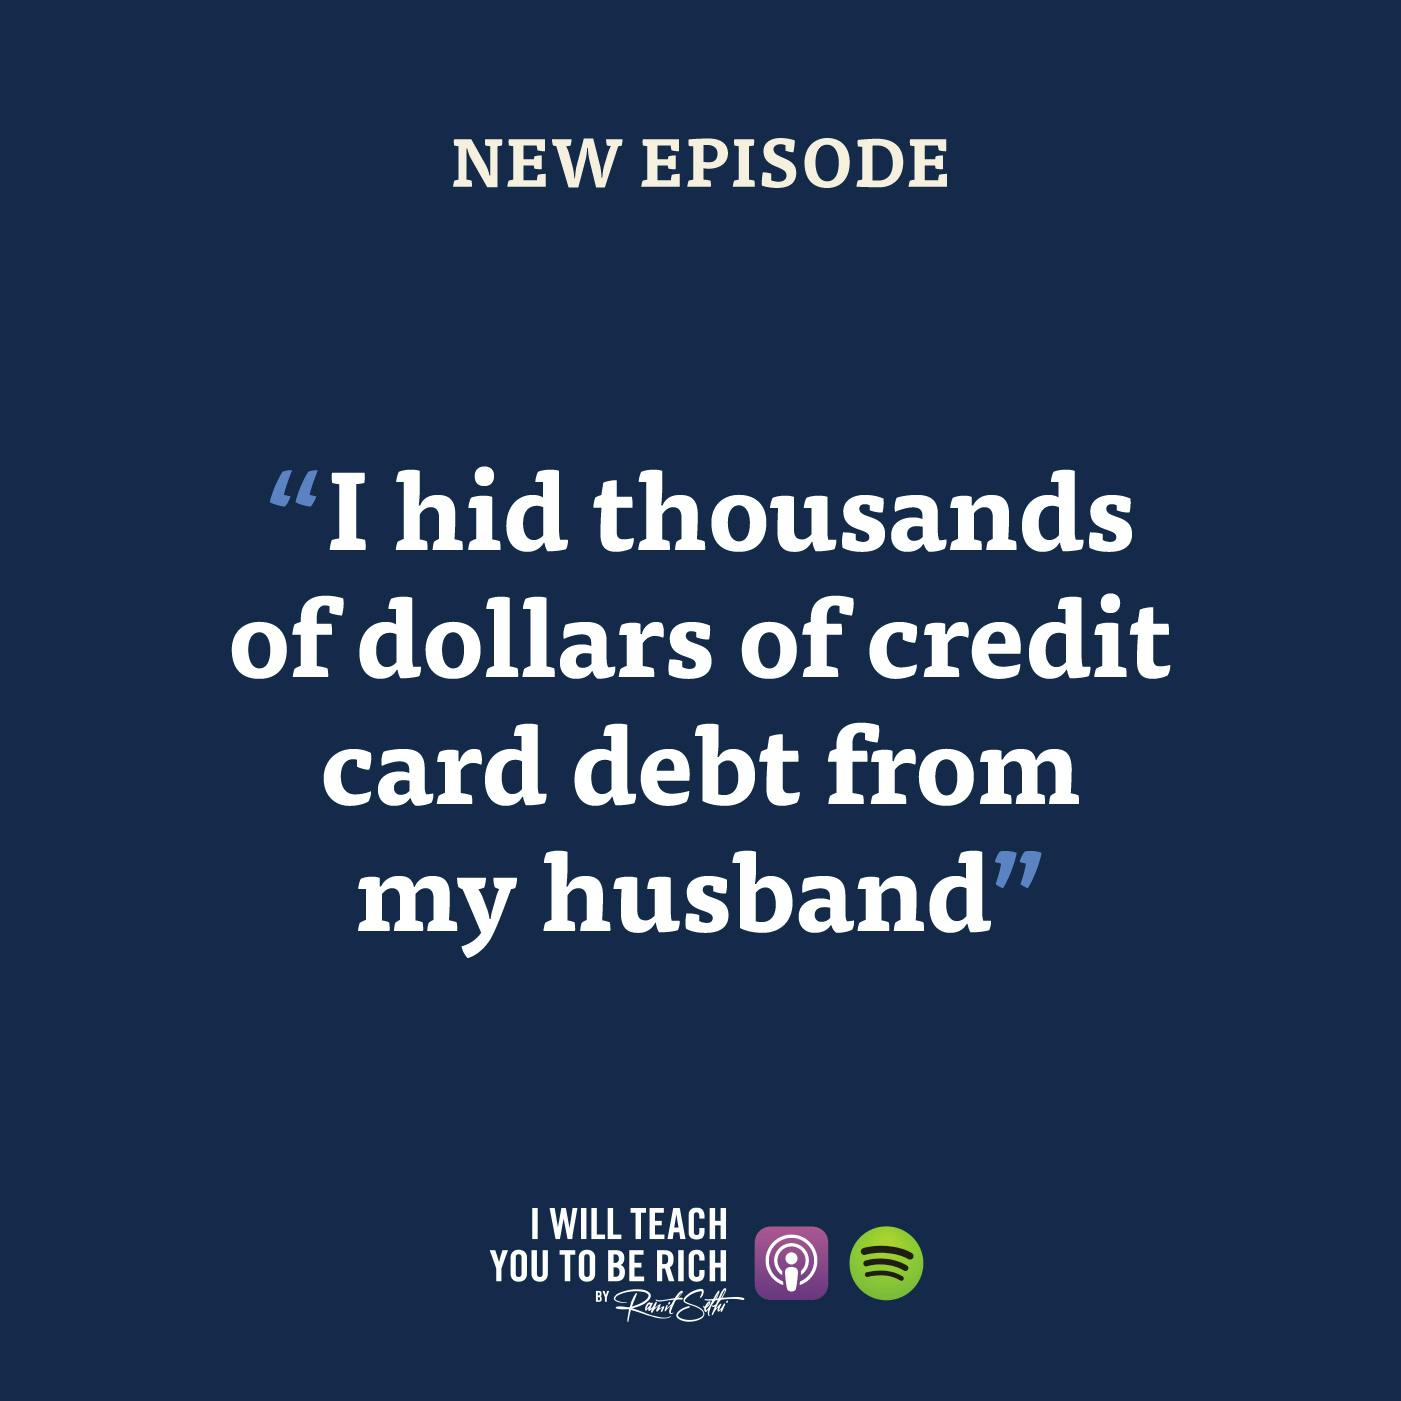 9. “I hid thousands of dollars of credit card debt from my husband”